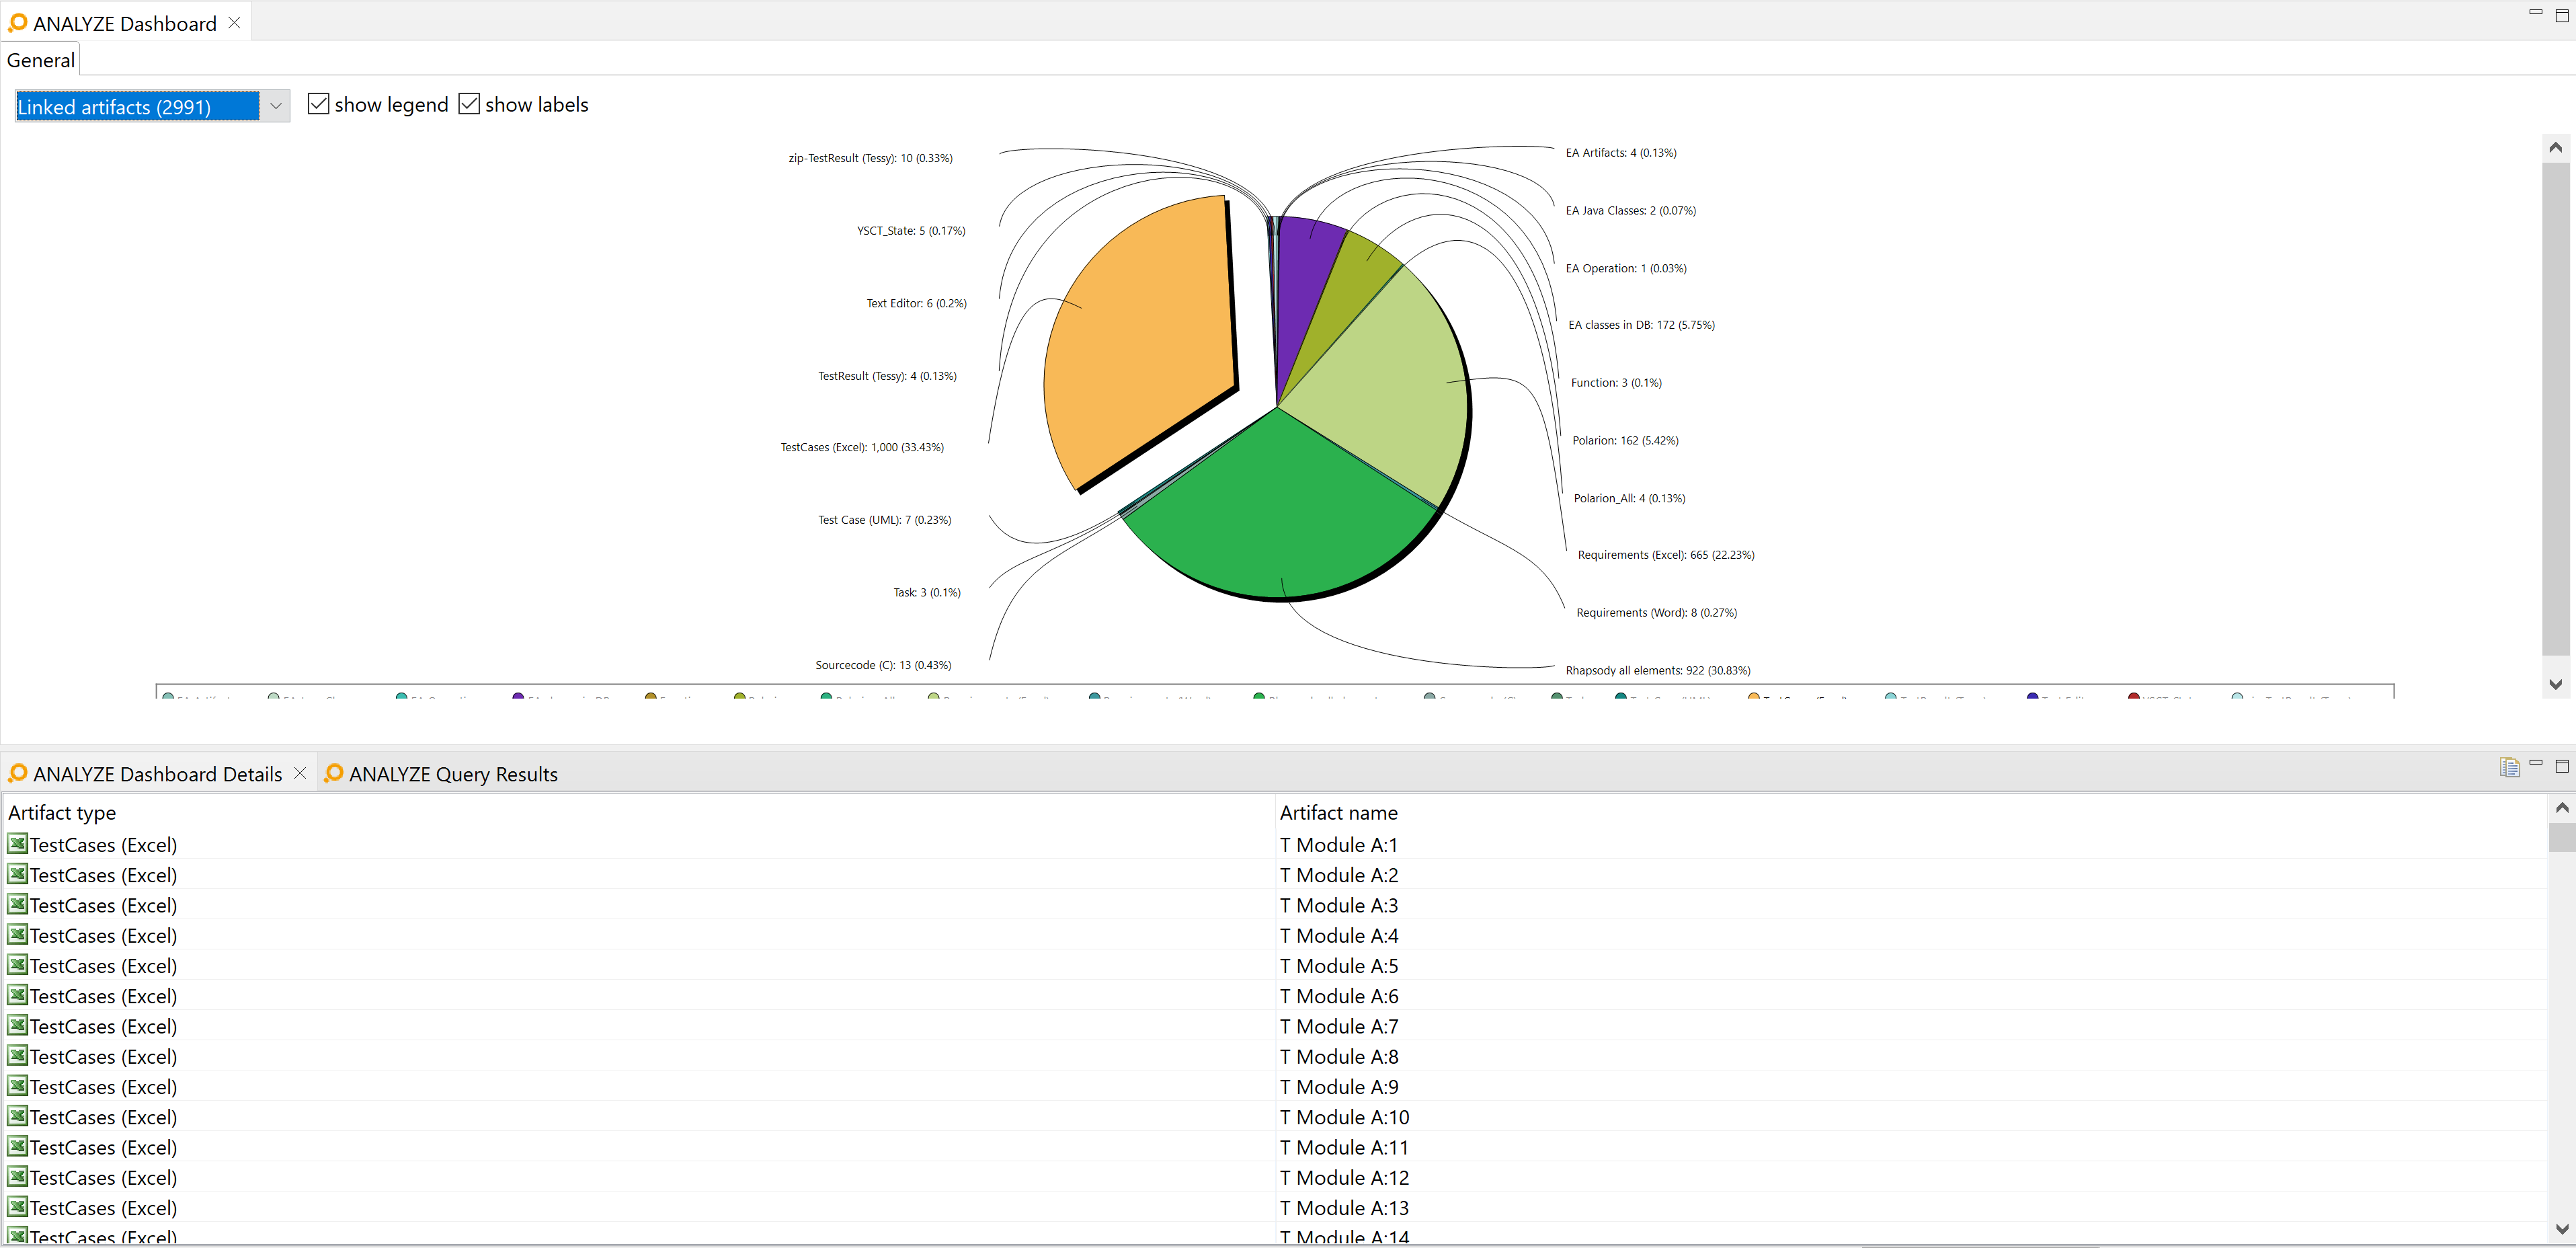 Interactive pie chart sections in the "ANALYZE Dashboard" view